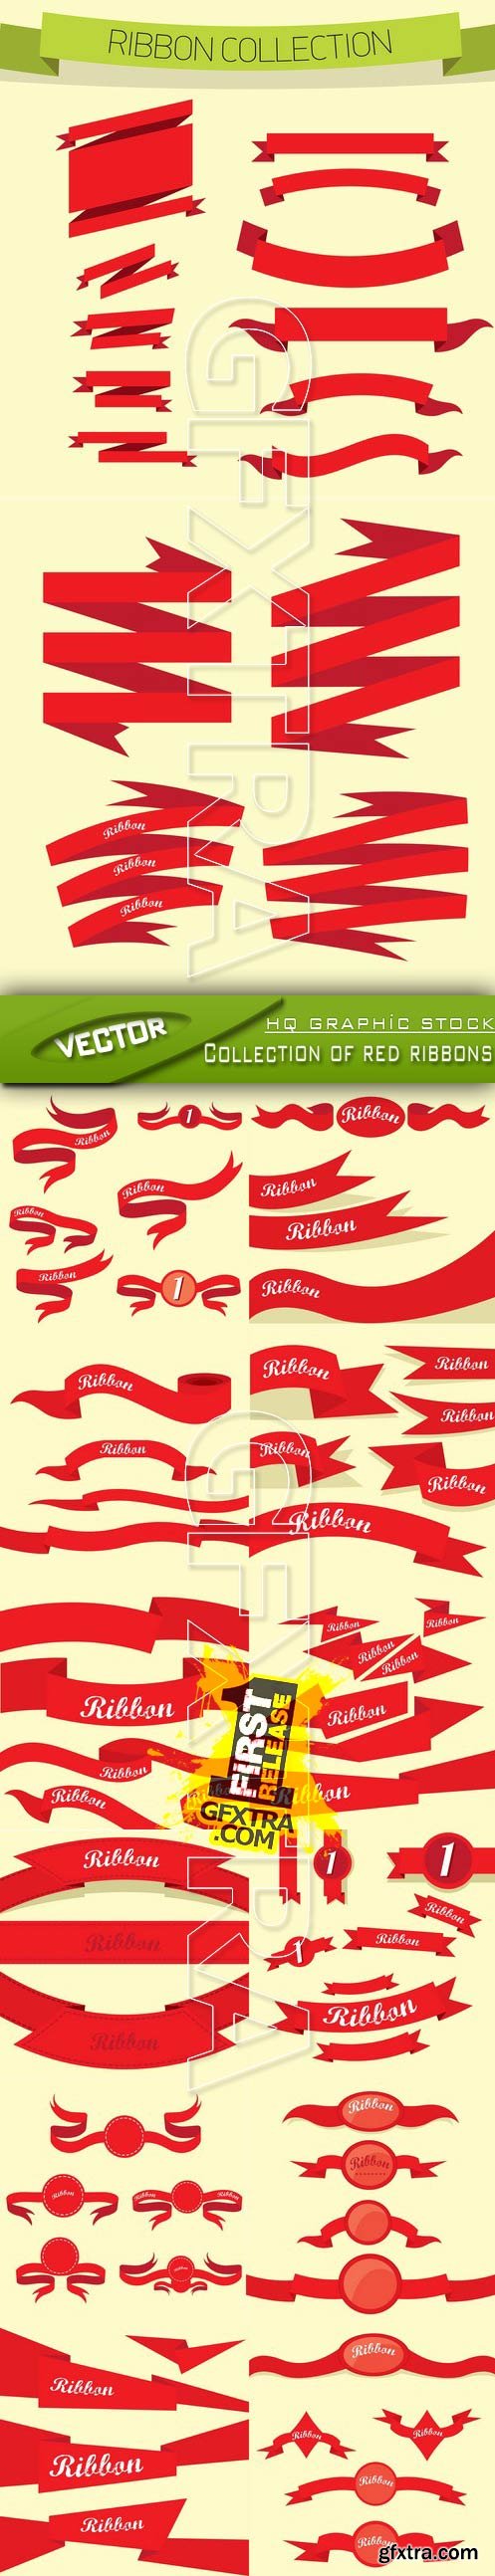 Stock Vector - Collection of red ribbons